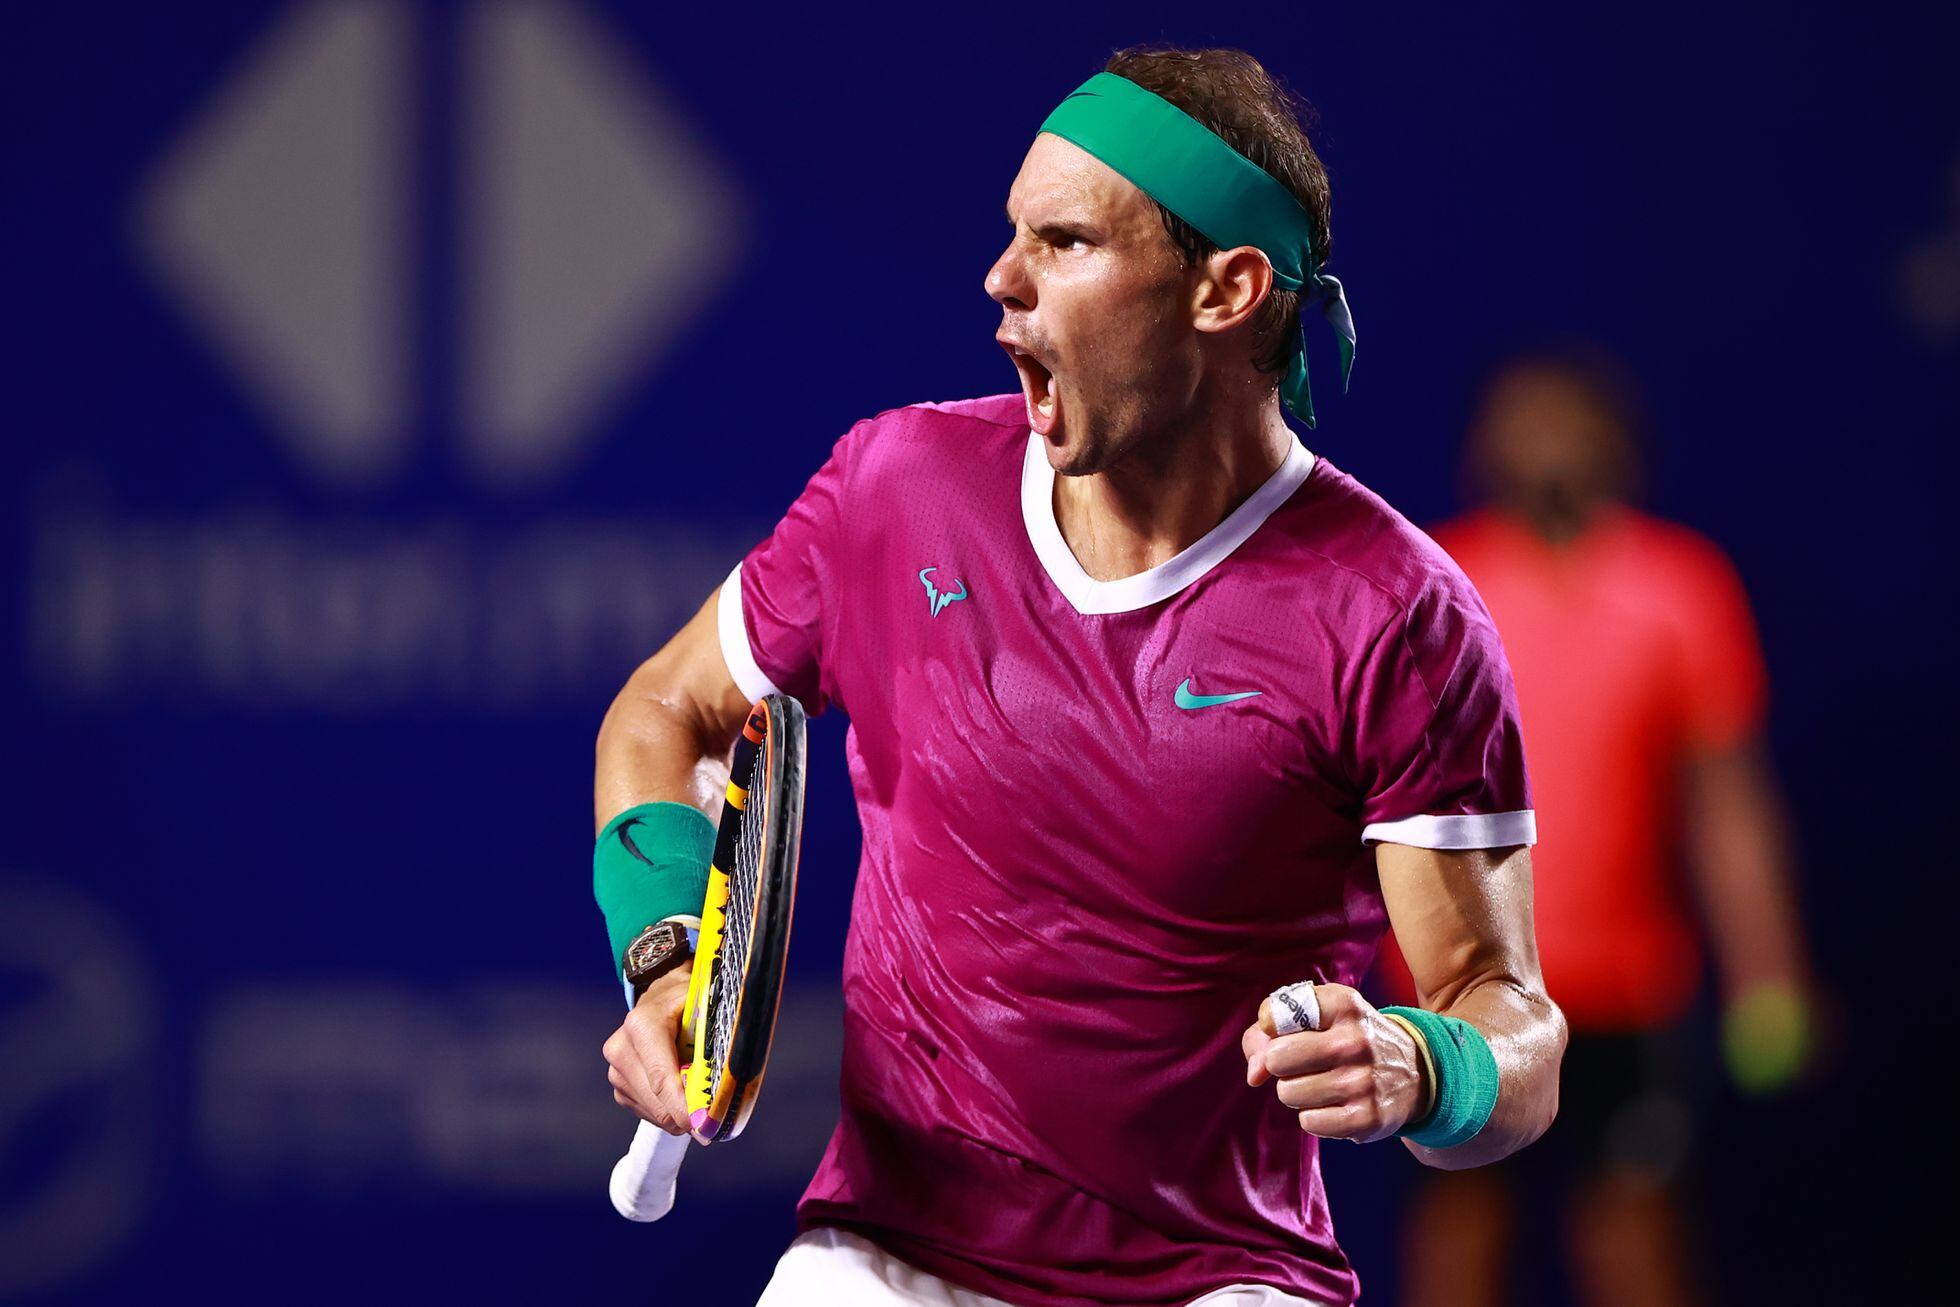 Nadal reaches the semifinals in Acapulco and will face Medvedev again